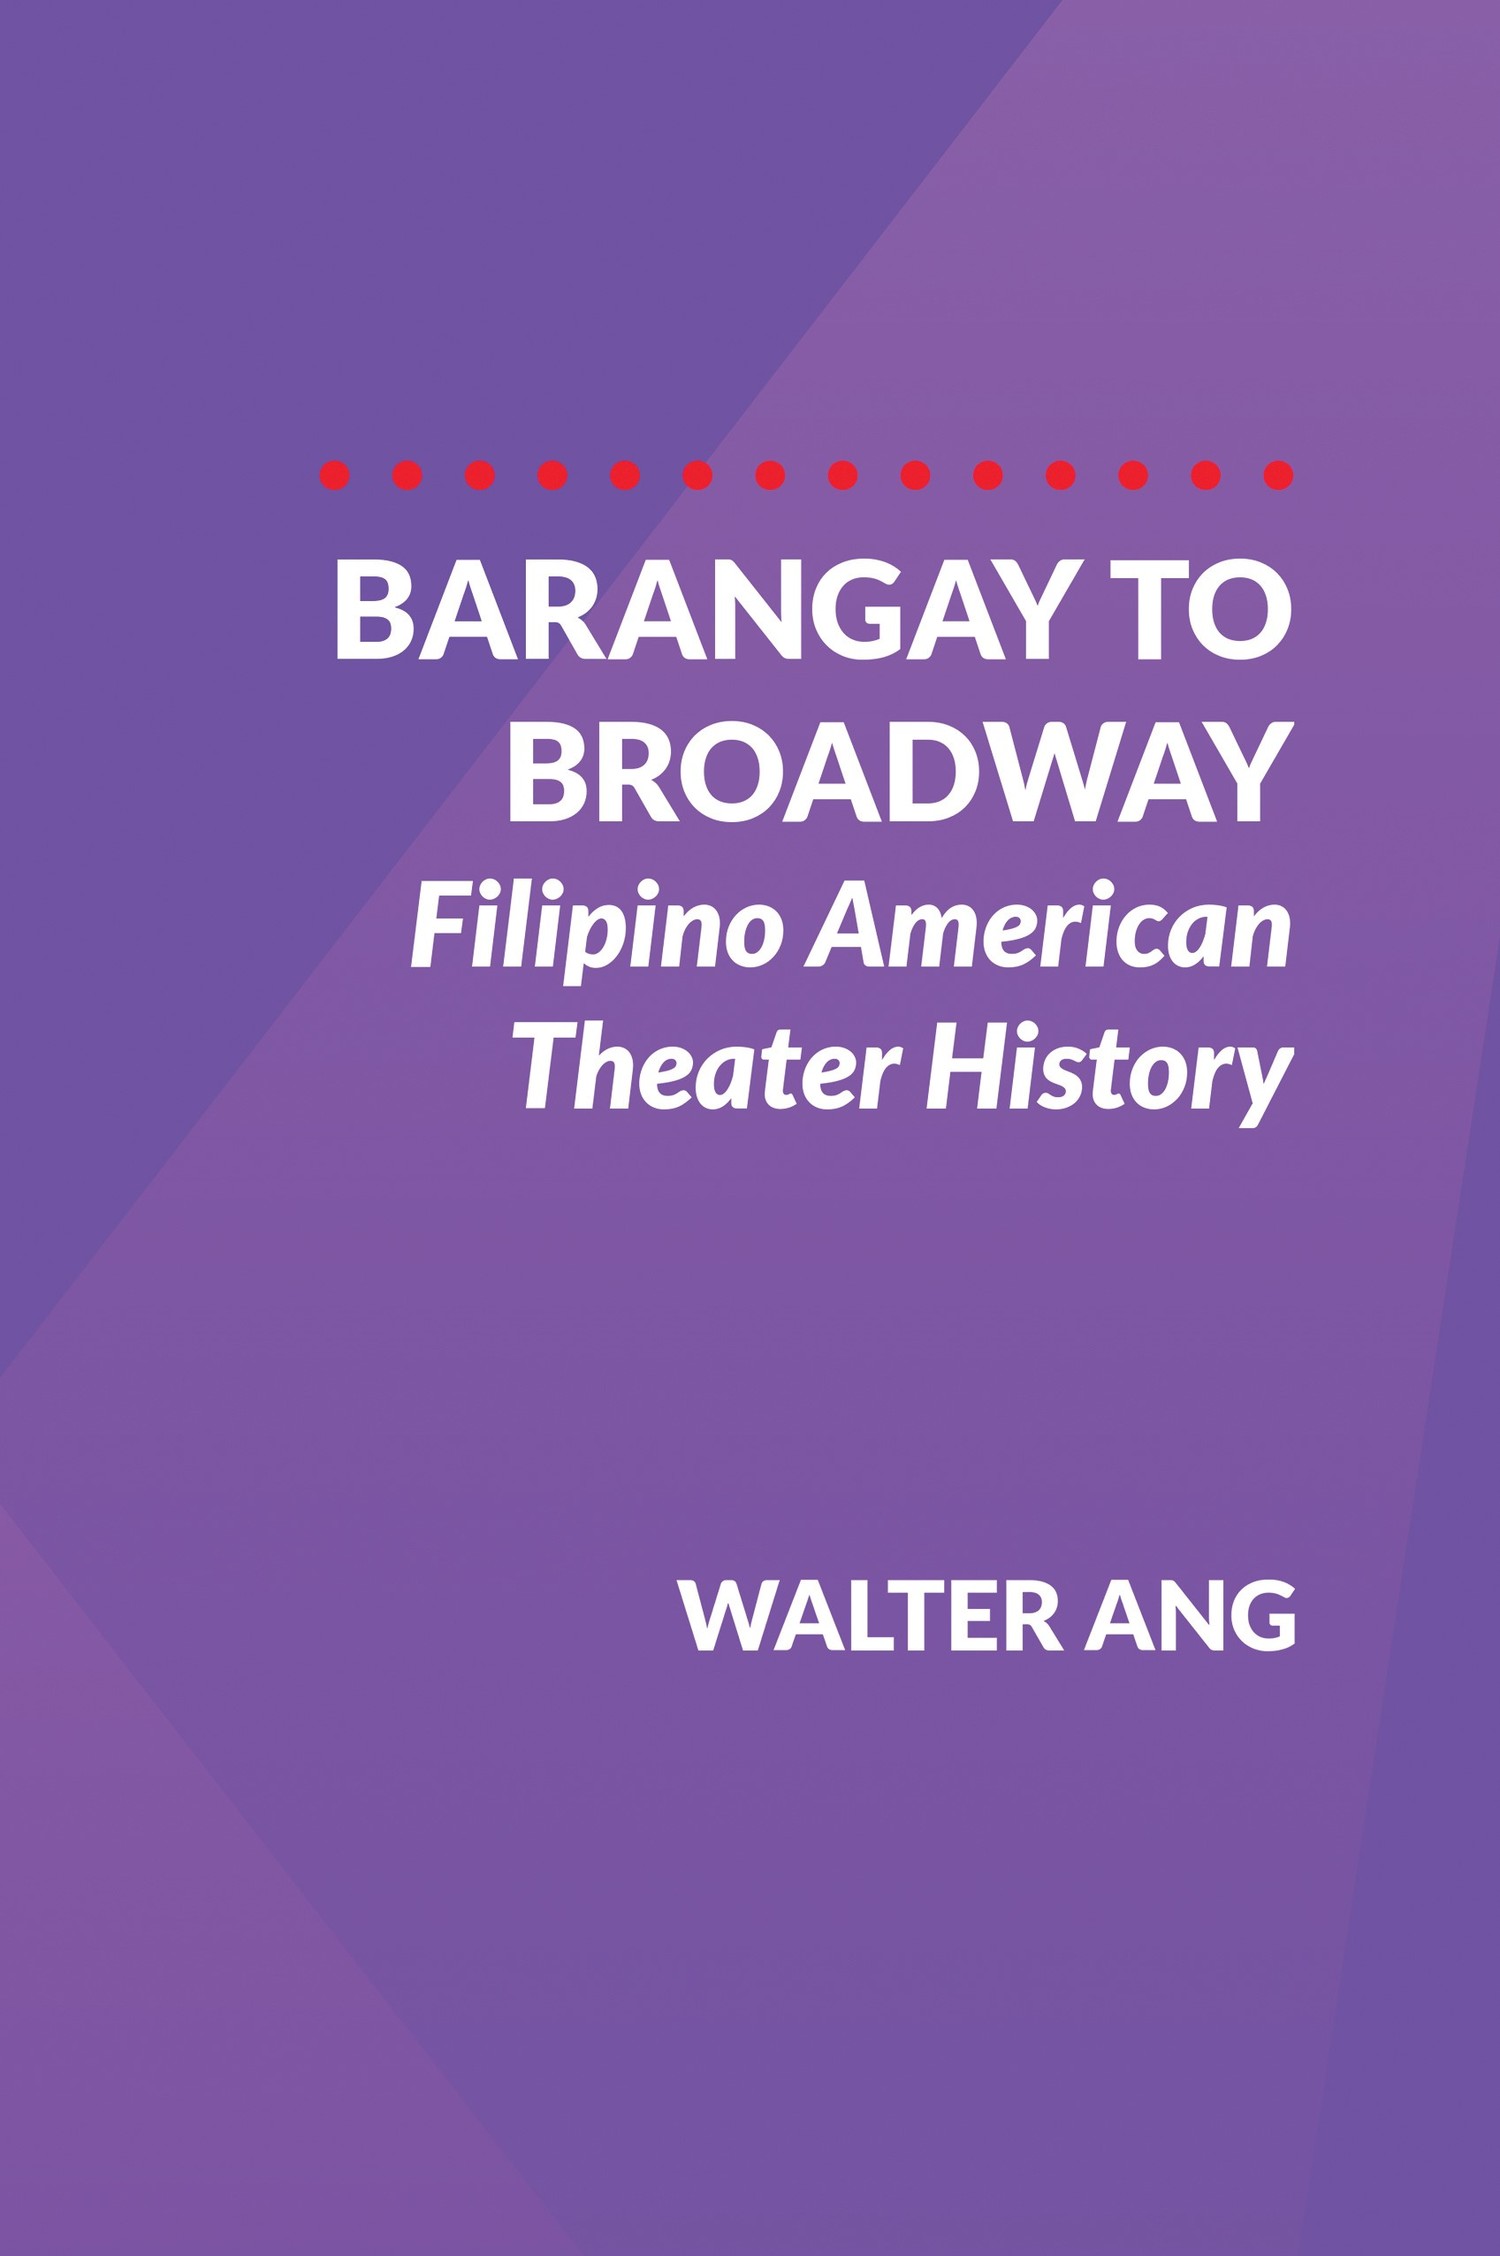 Book On Filipino American Theater History Now Available 